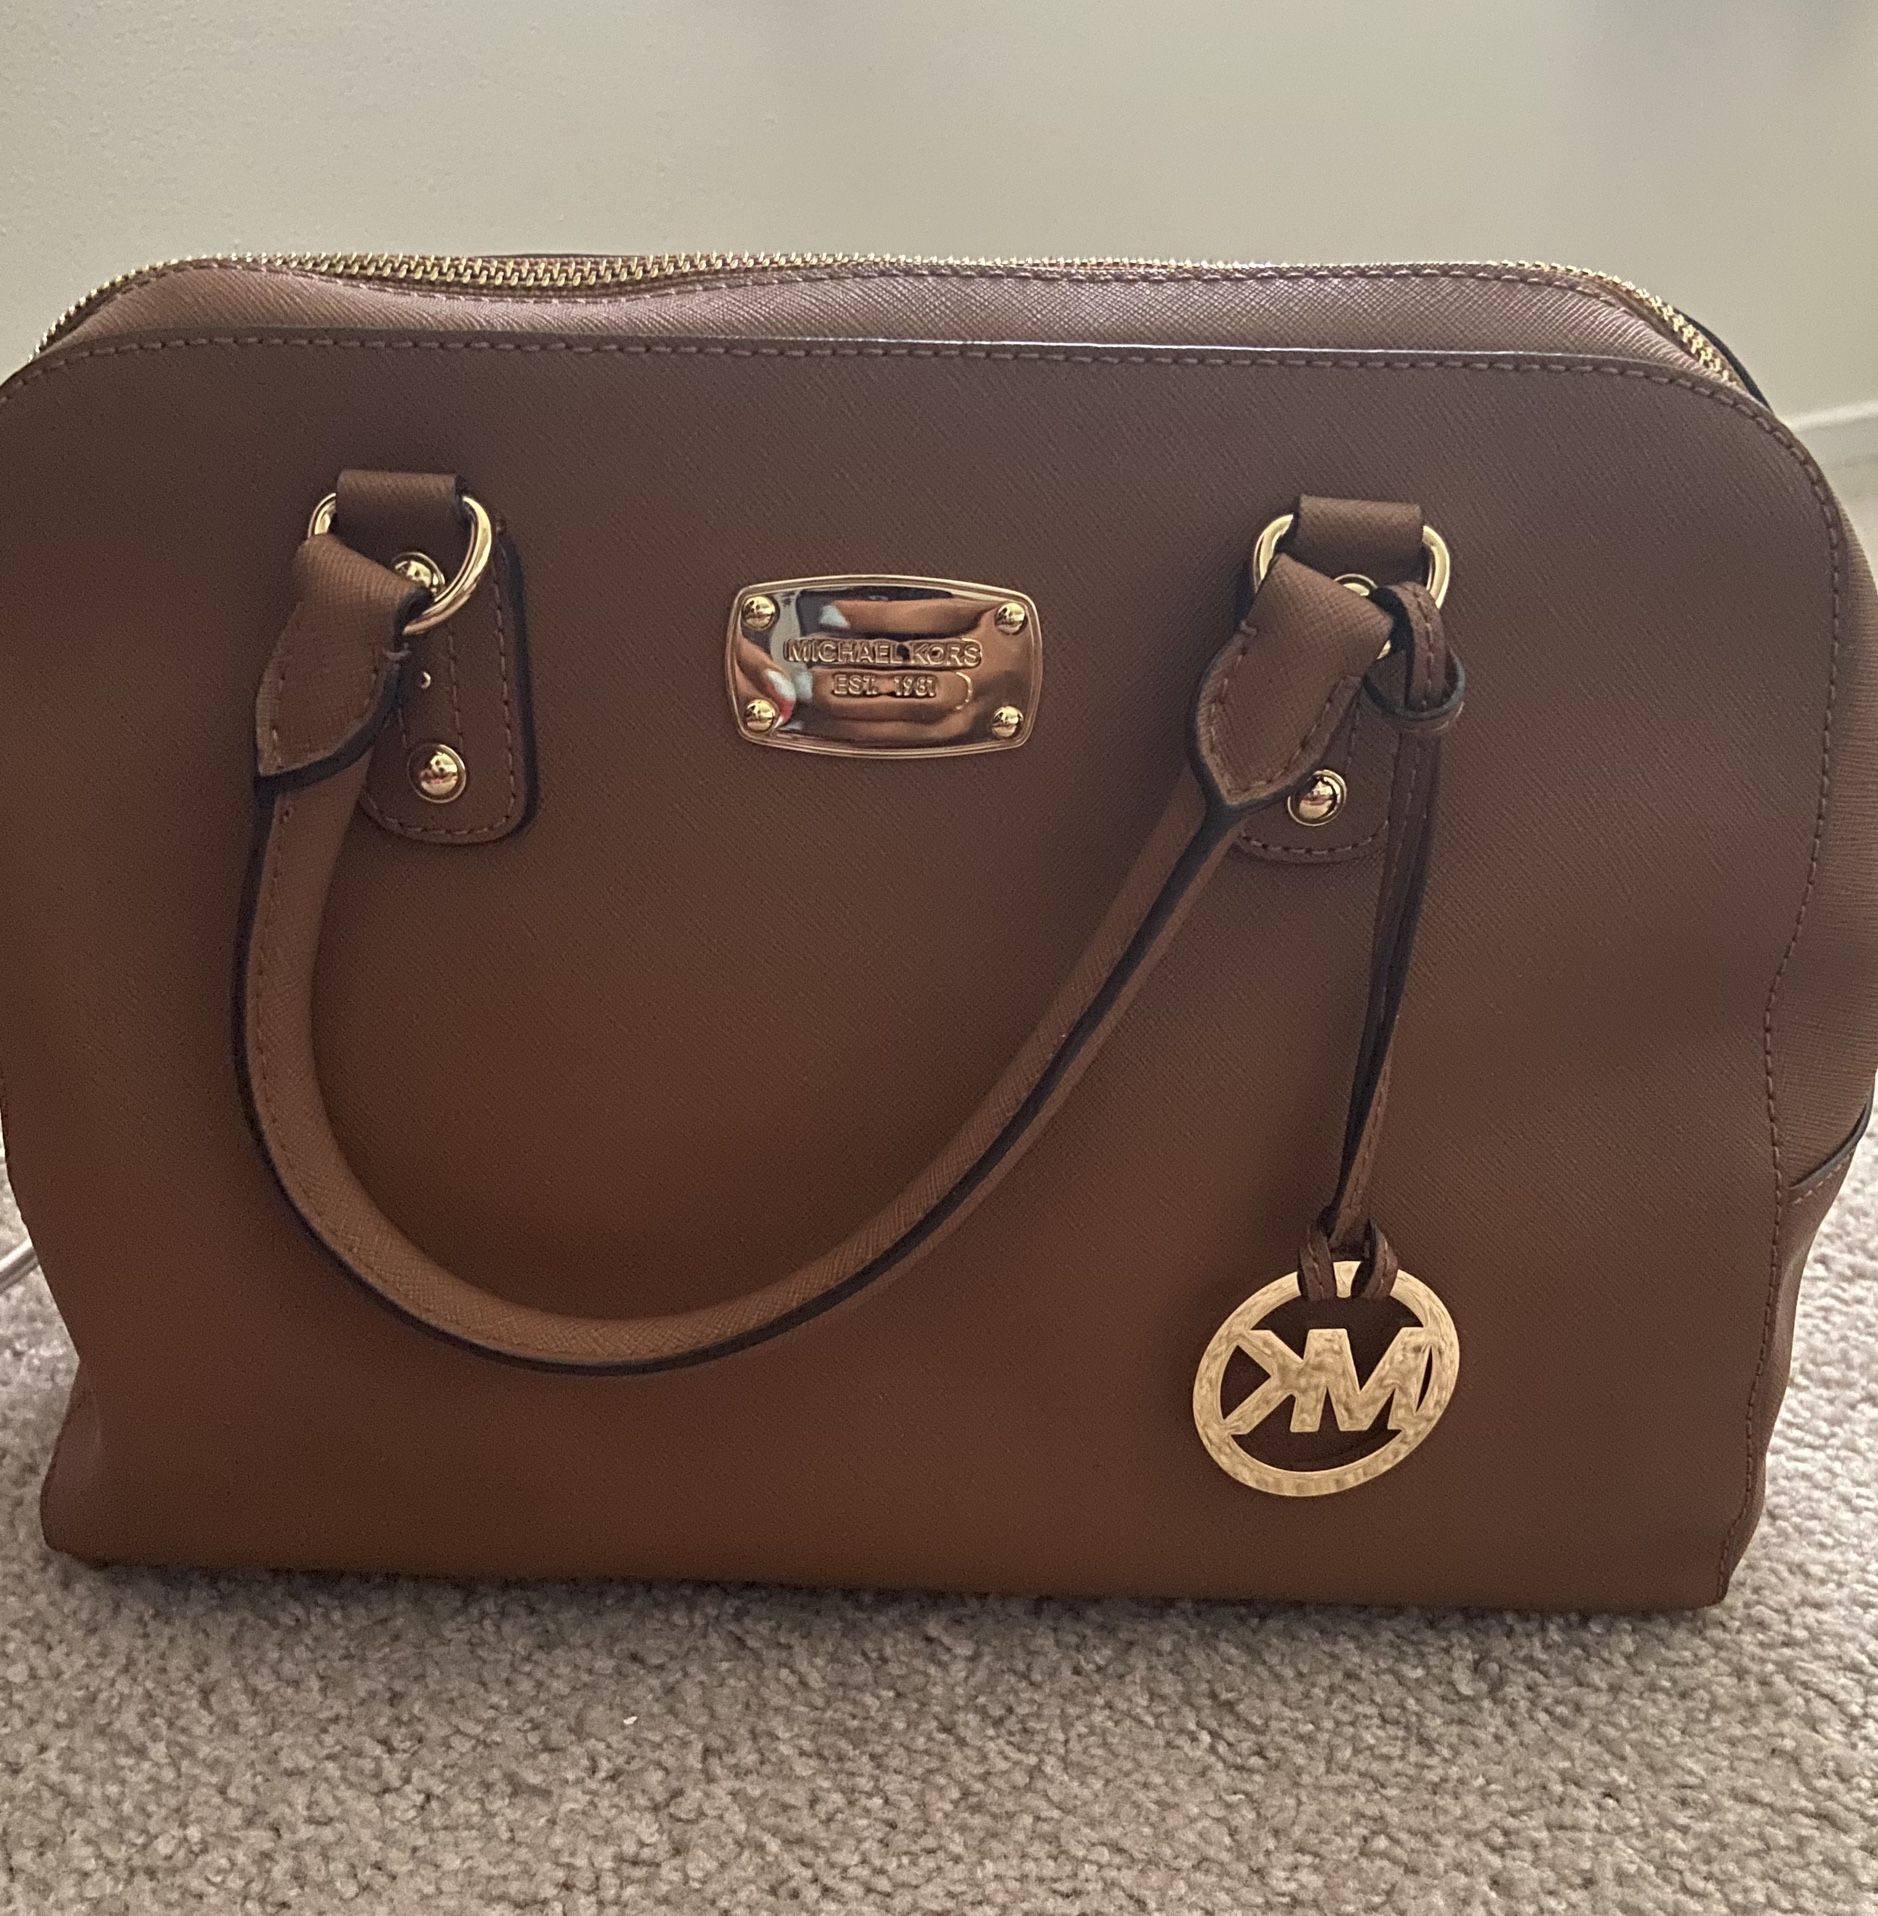 Michael Kors Brown Bowling Bag Purse With Strap for Sale in Ellicott City,  MD - OfferUp